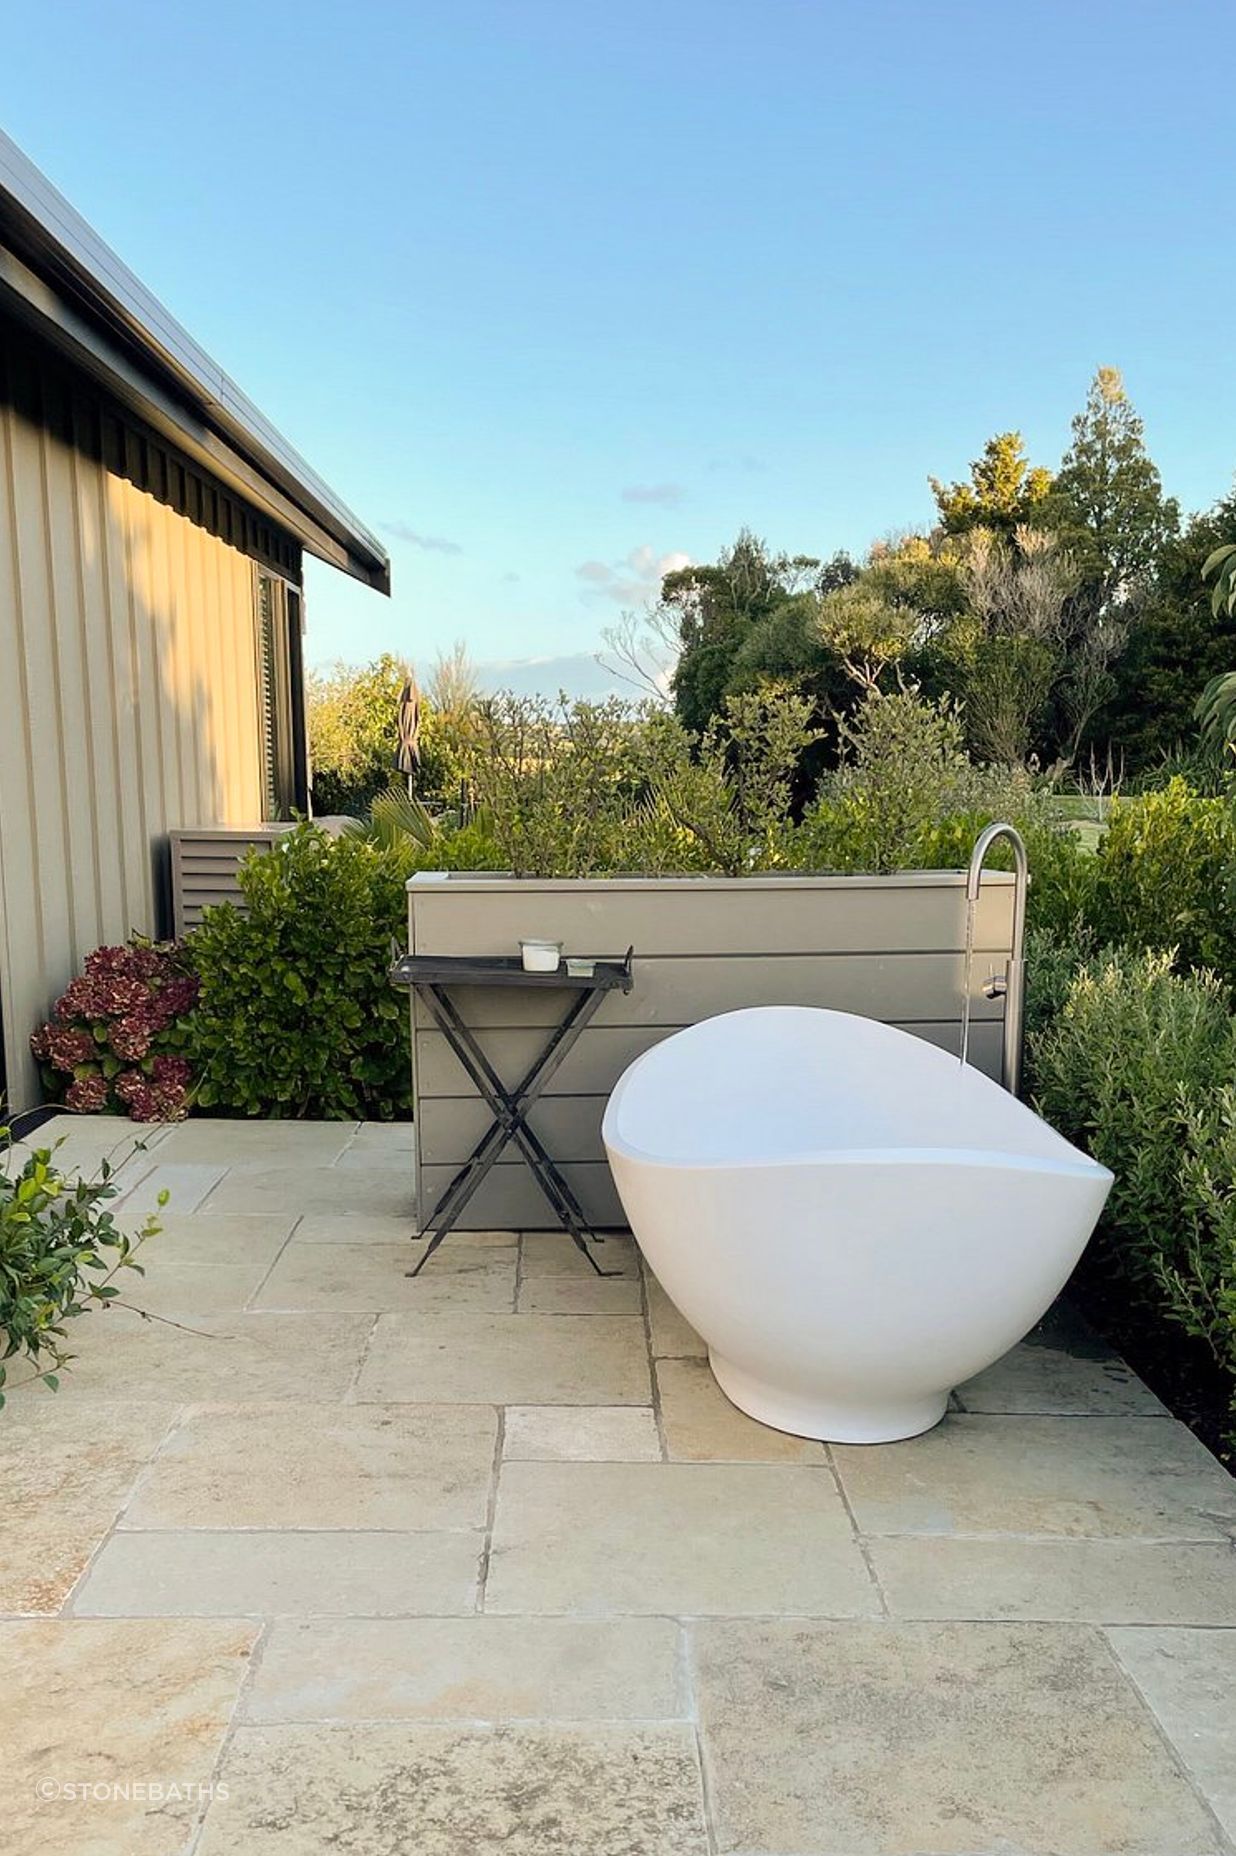 Stonebaths have an extensive range of baths ideal for outdoor use.